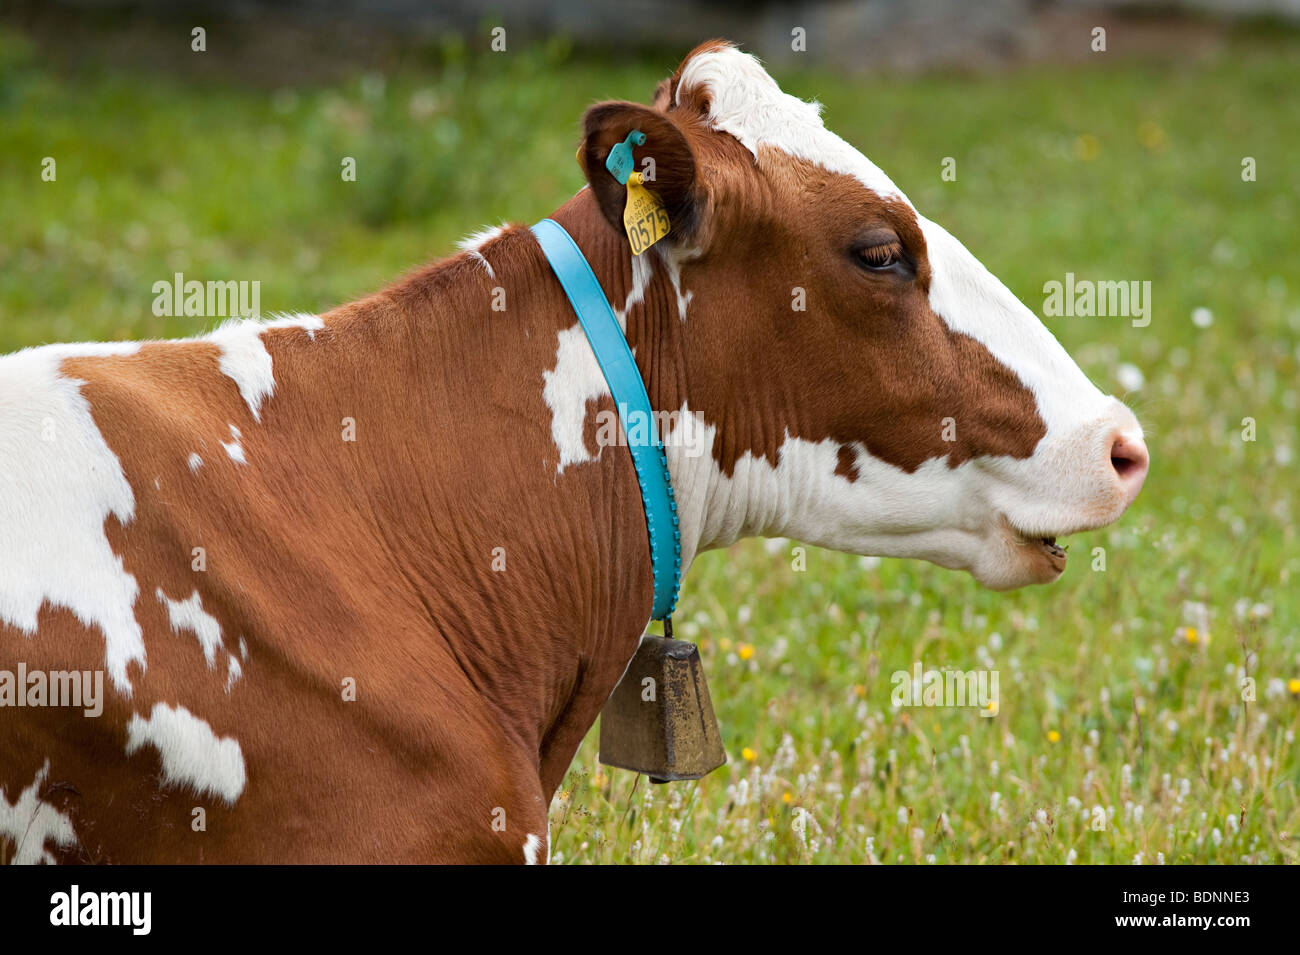 High in the mountains in the Gudbrandsdalen region of Norway, a dairy cow wears a cowbell around its neck Stock Photo